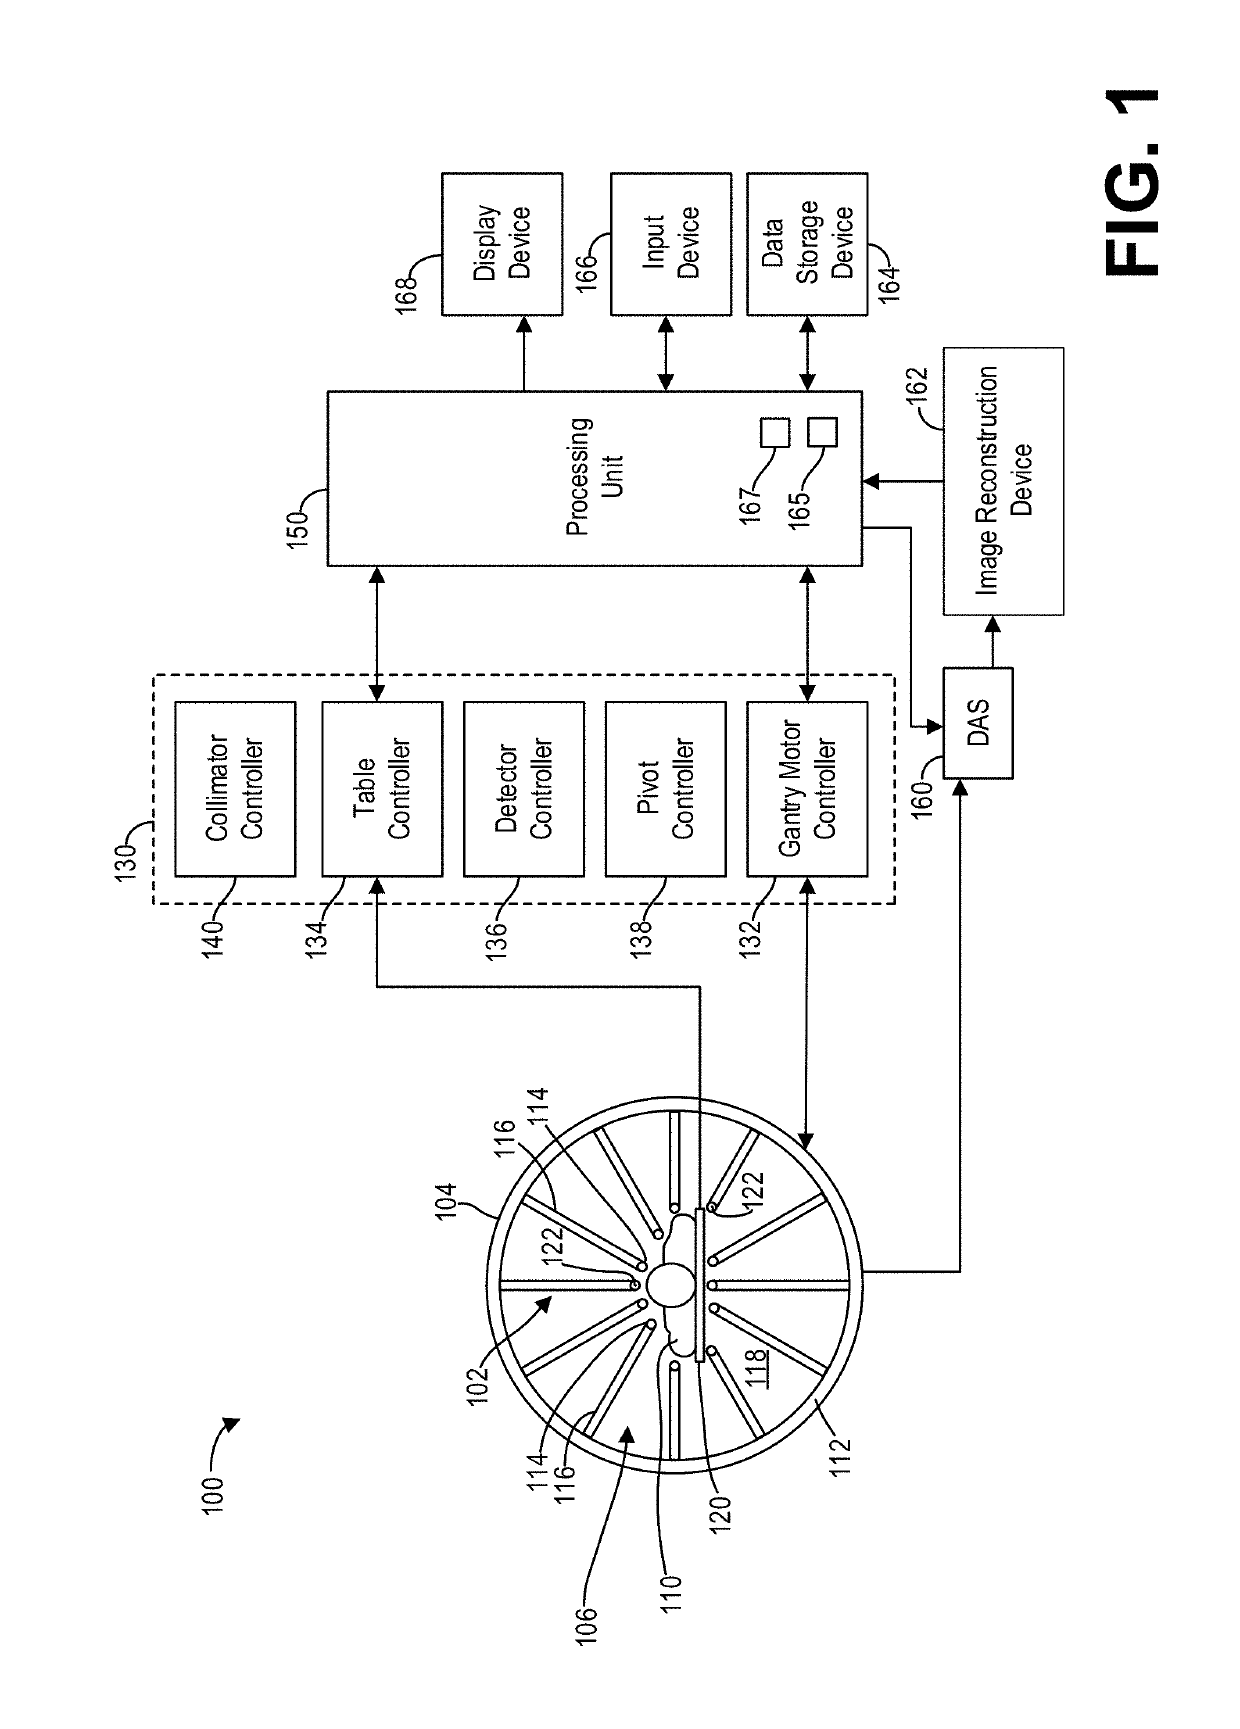 Systems and methods for calibrating a nuclear medicine imaging system